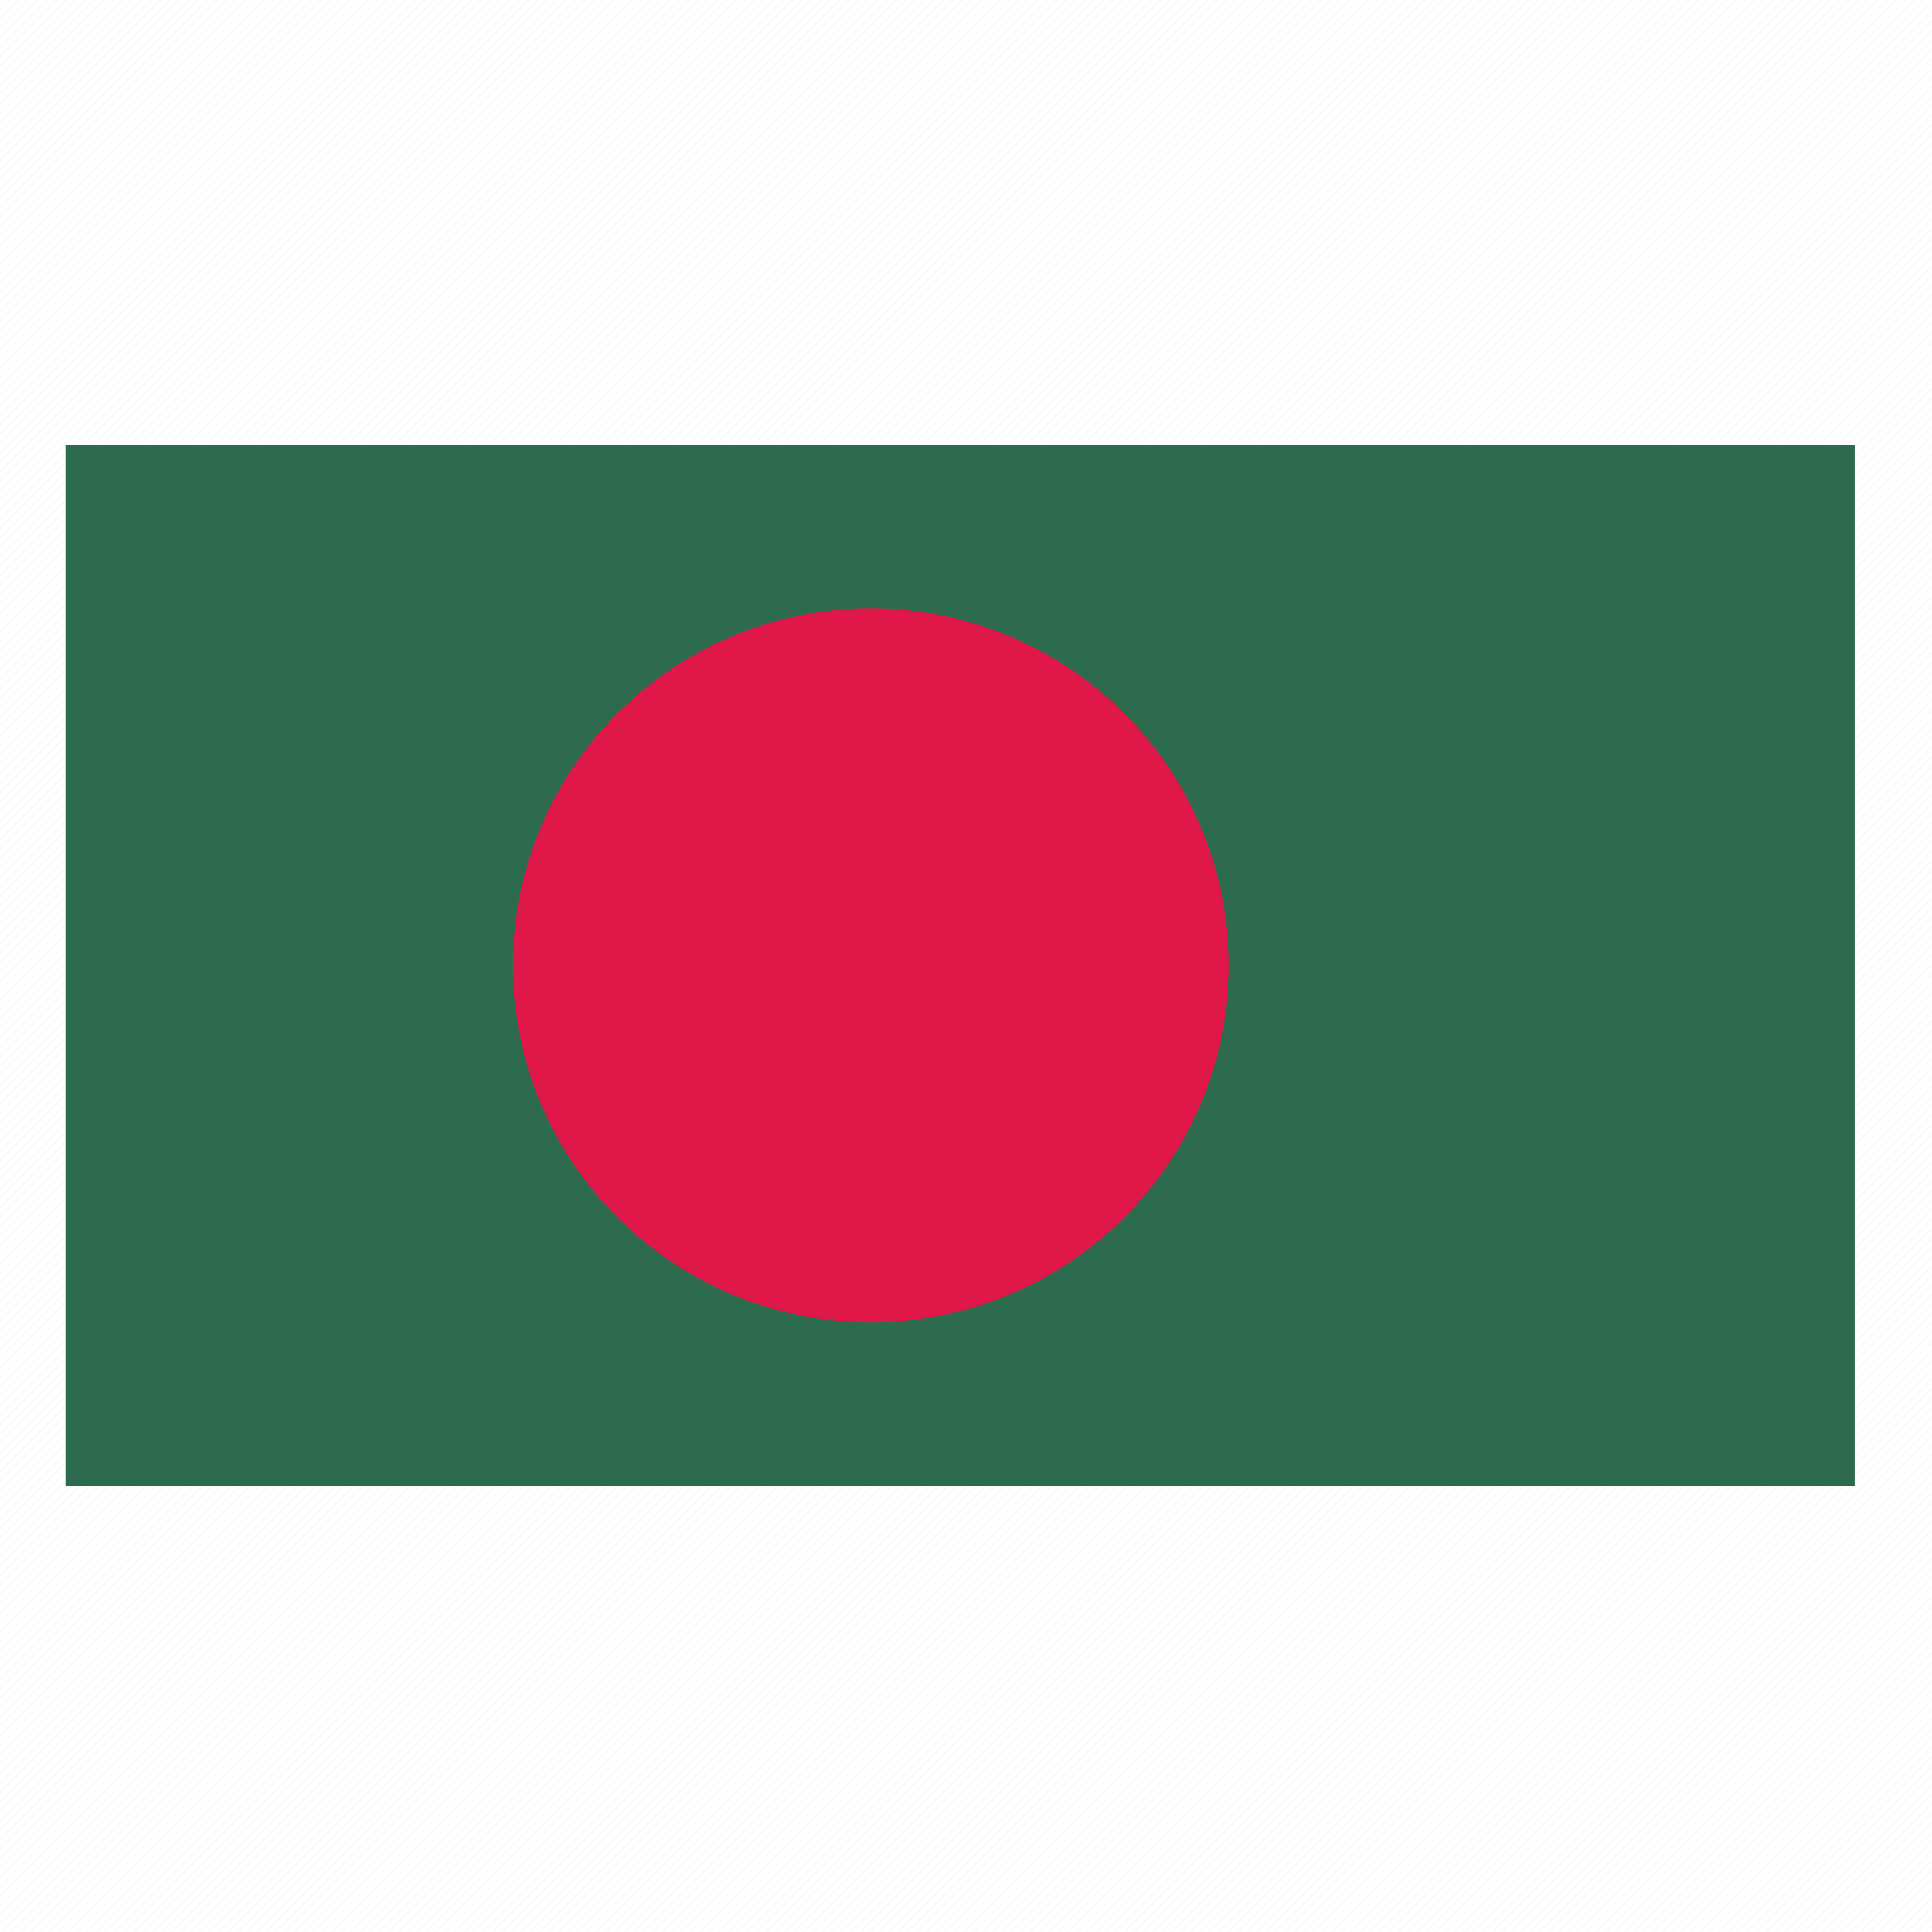 Bangladesh Flag Png Images Transparent Background Png Play | Images and ...